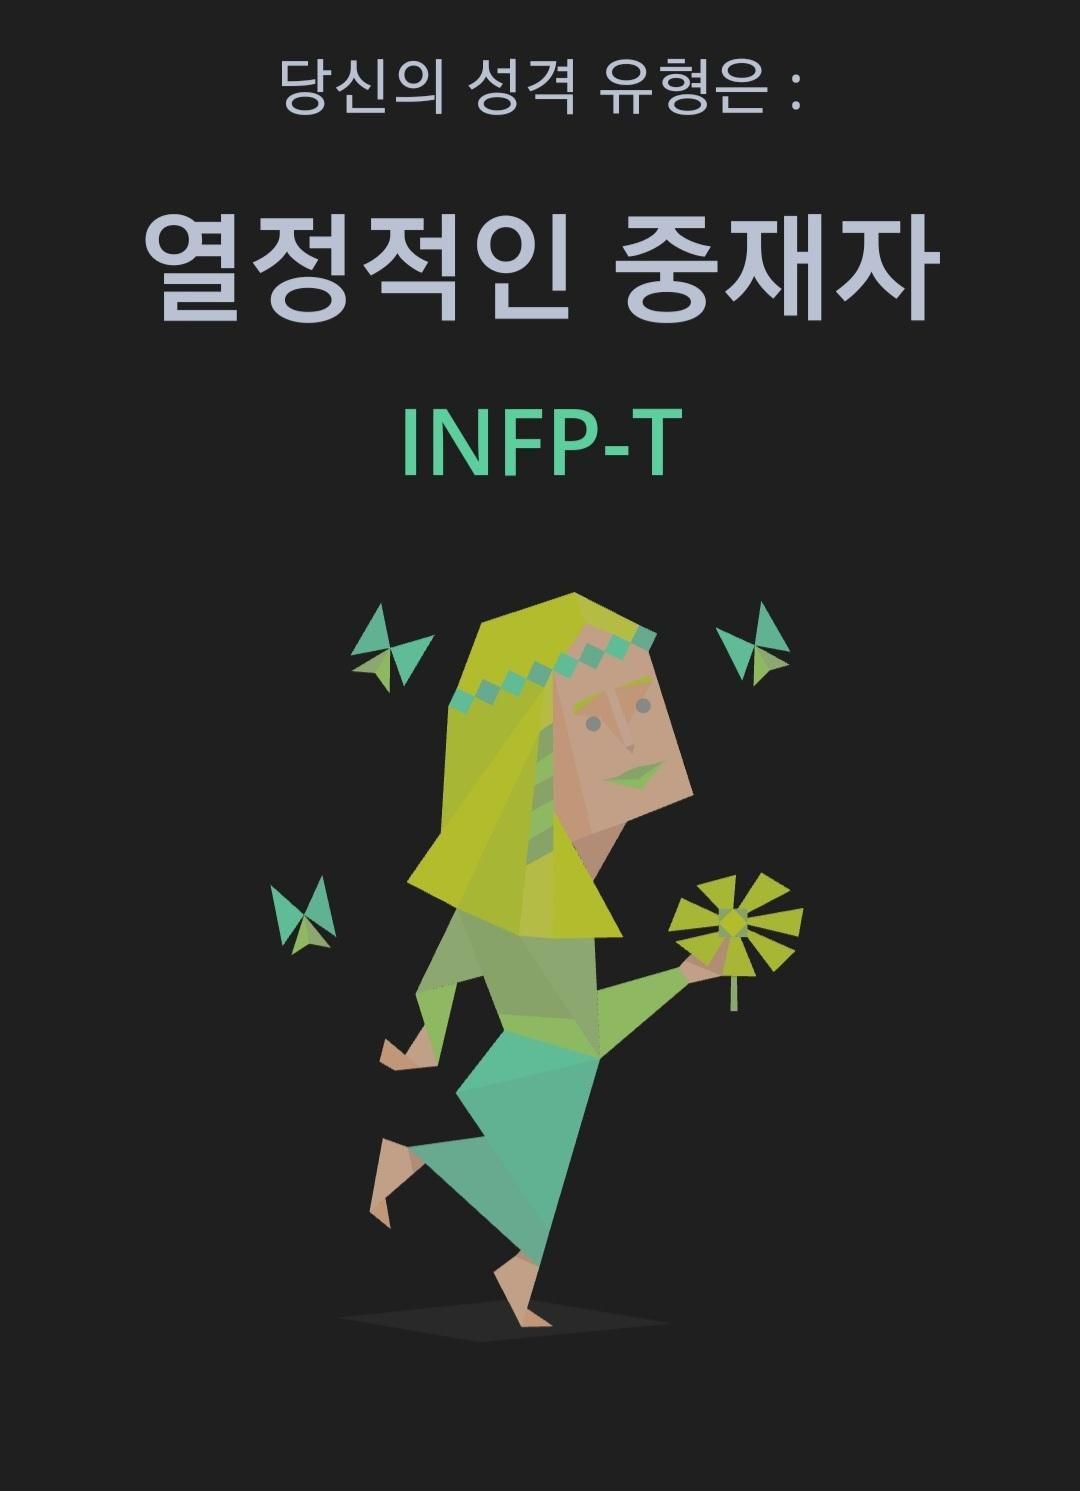 Infp meaning